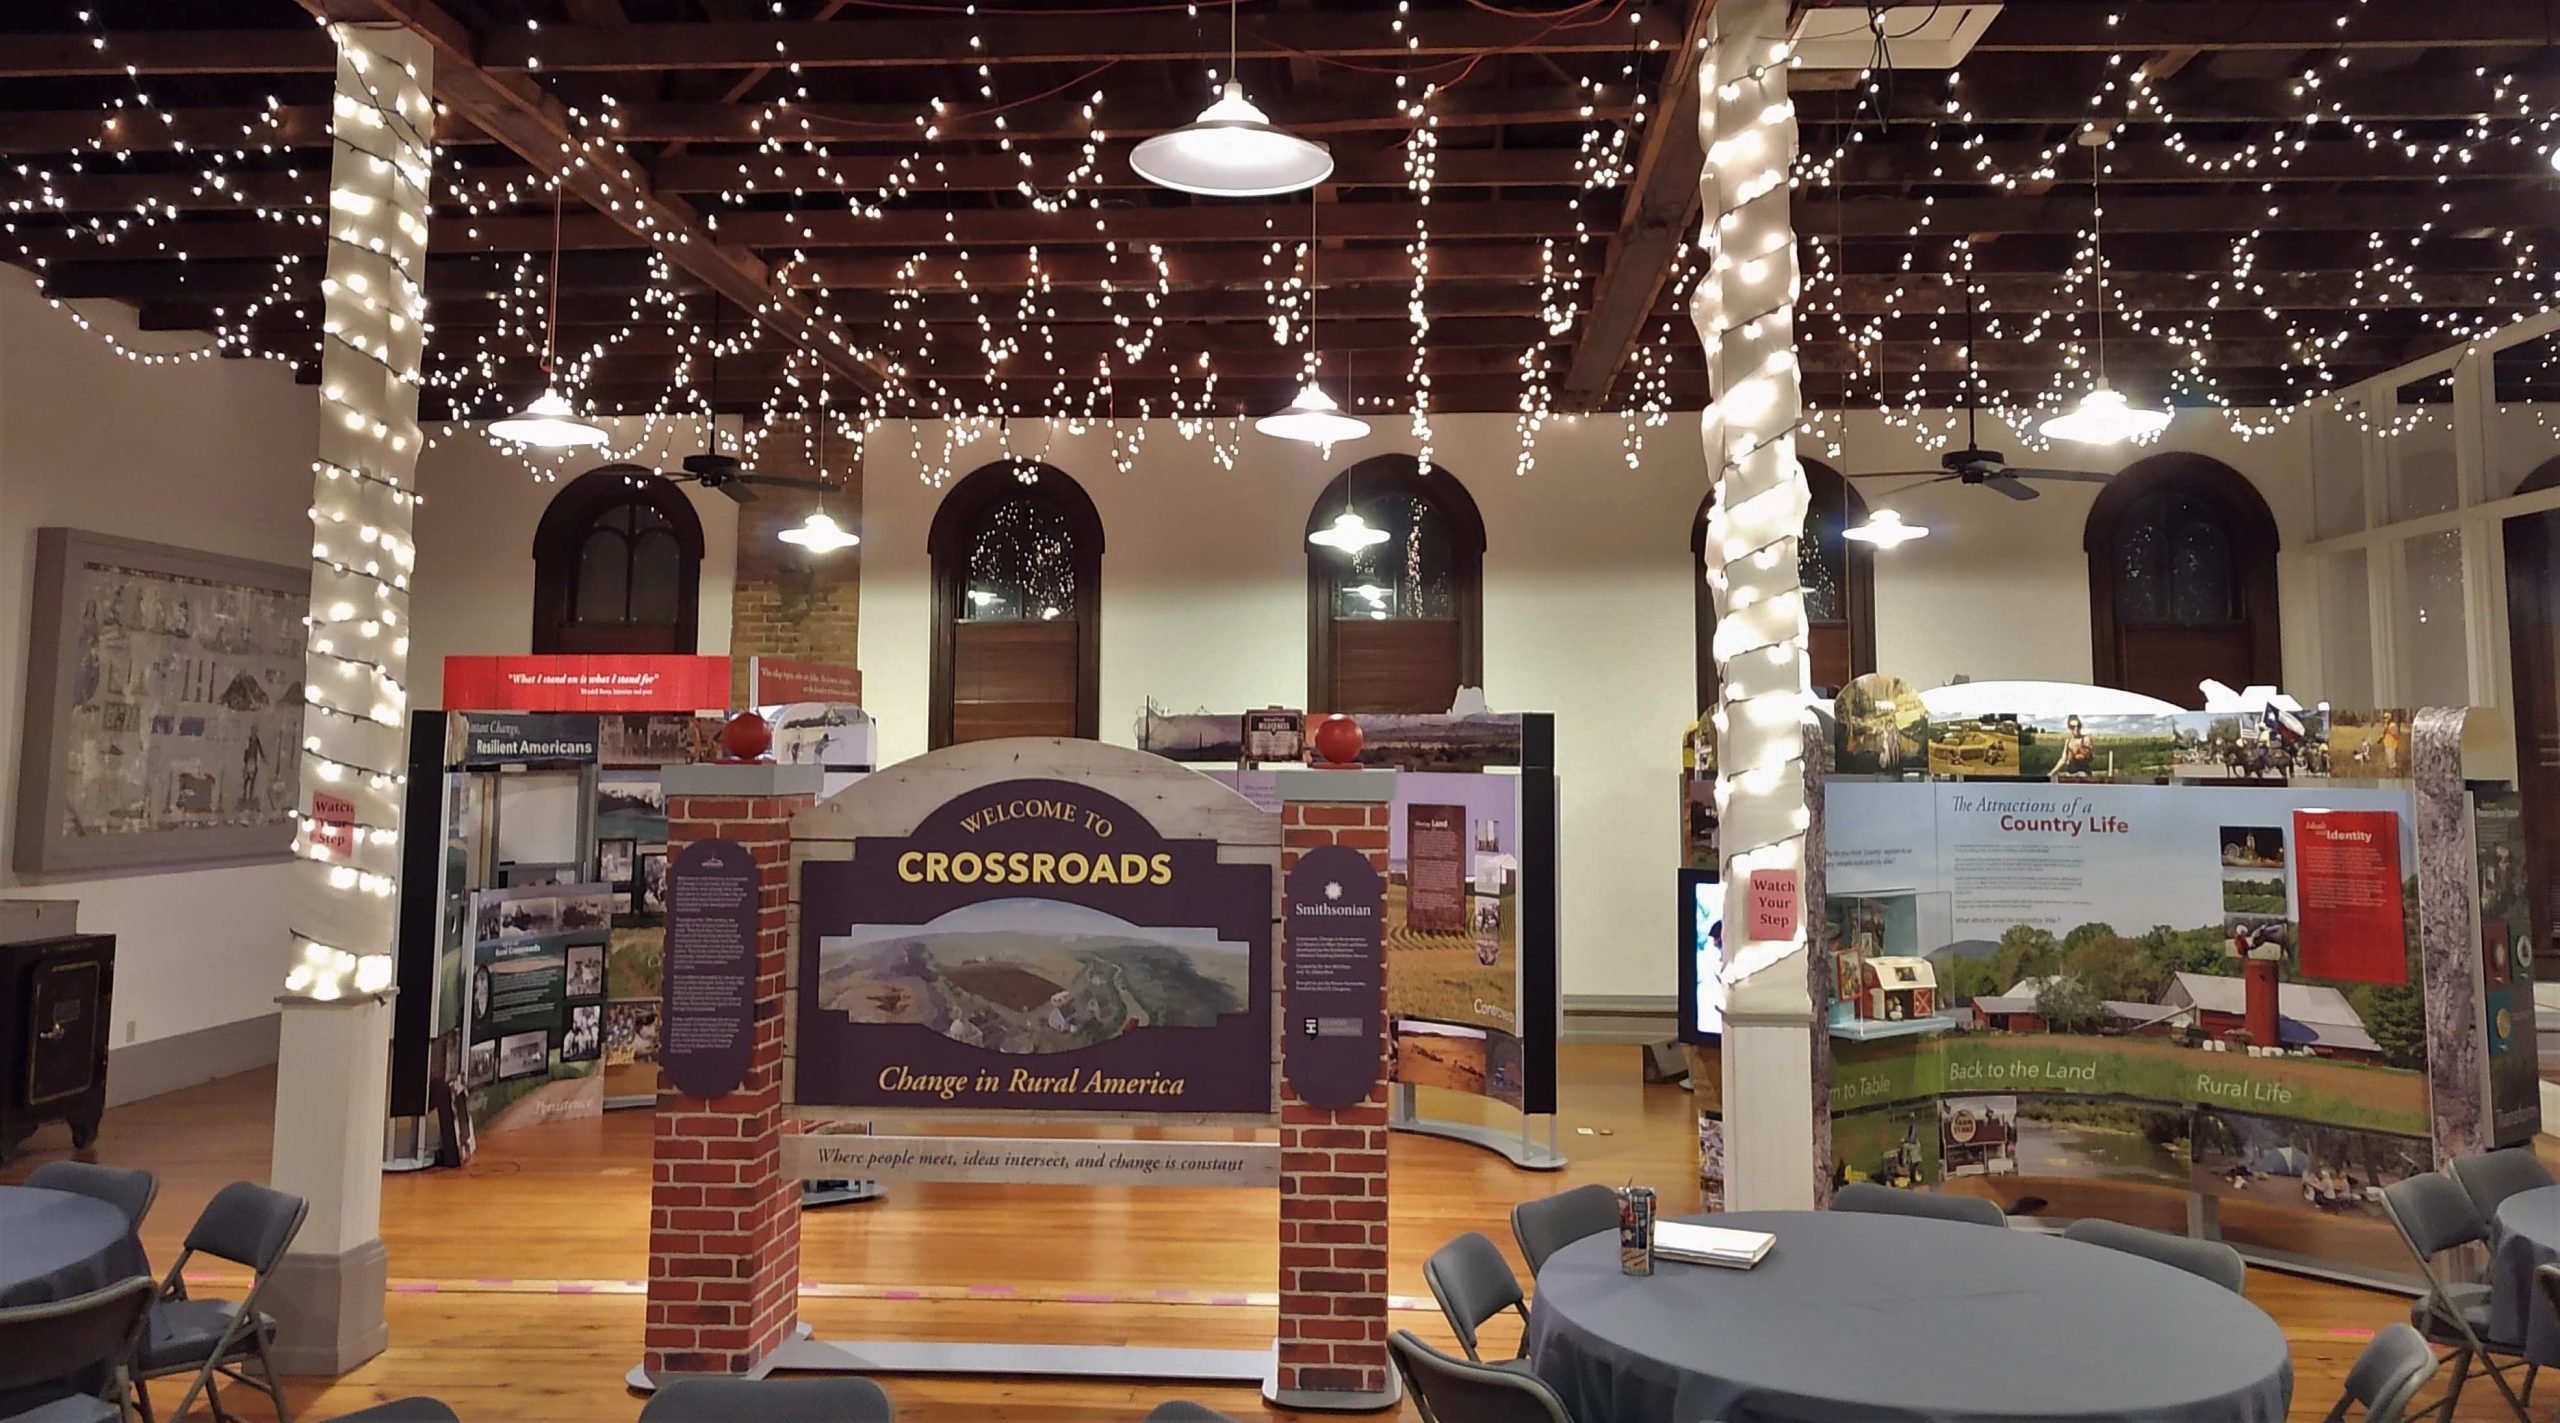 Photograph of Crossroads: Change in Rural America on exhibition at the Atlanta Museum, Atlanta, IL.